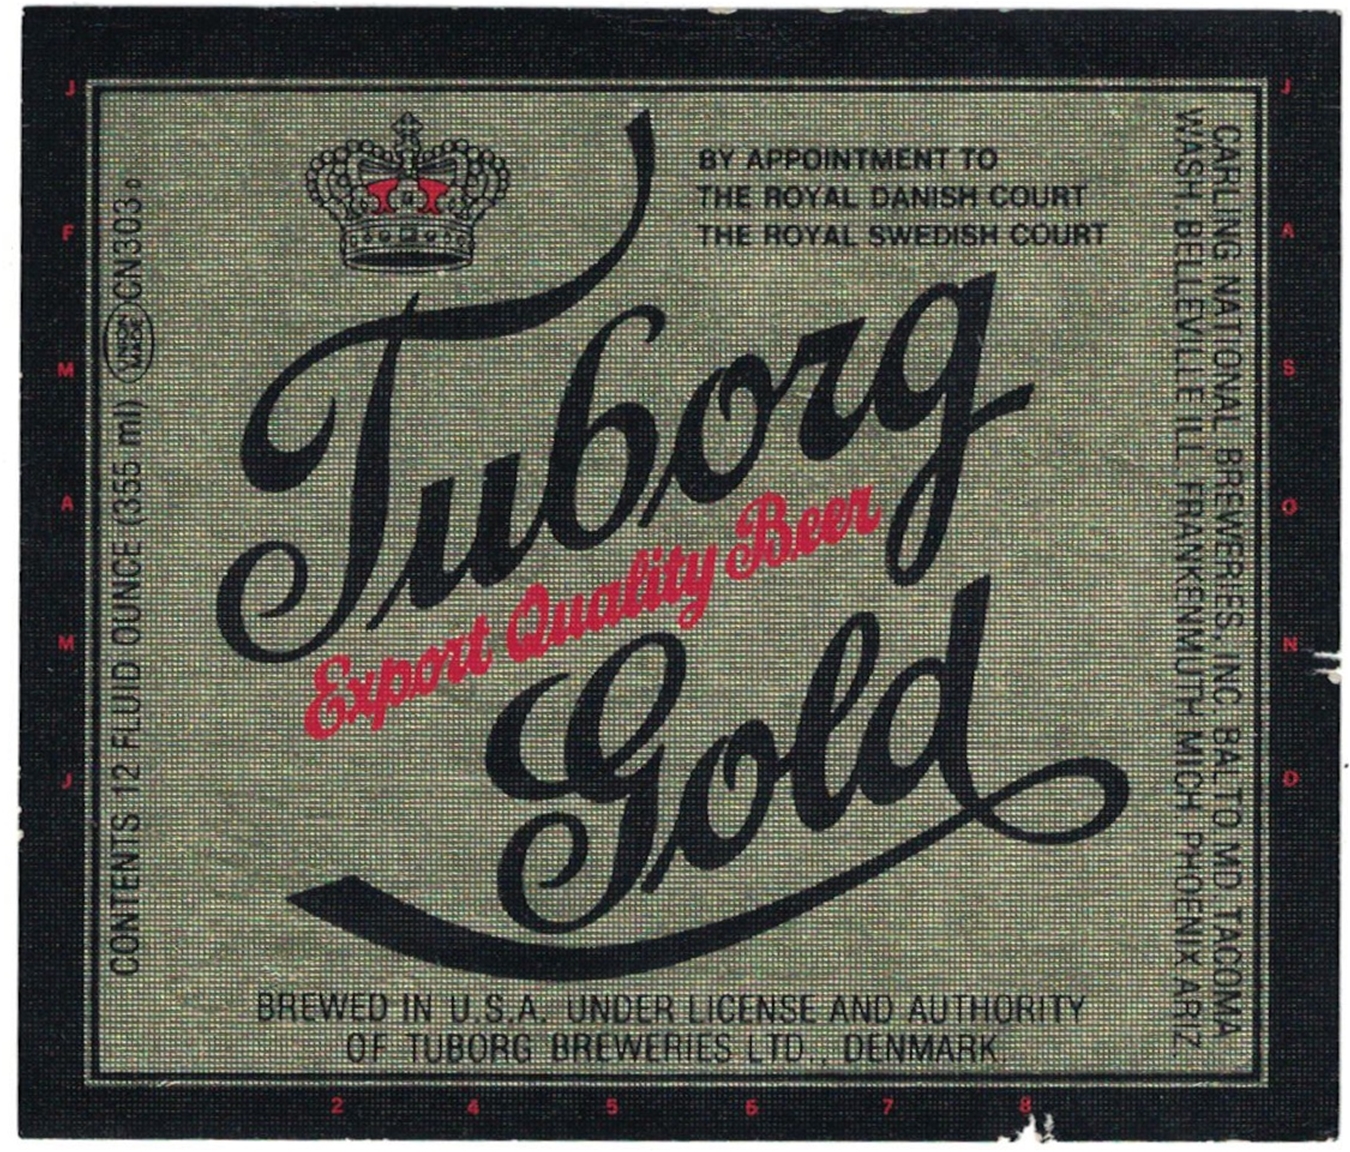 Tuborg Gold Export Quality Beer Label